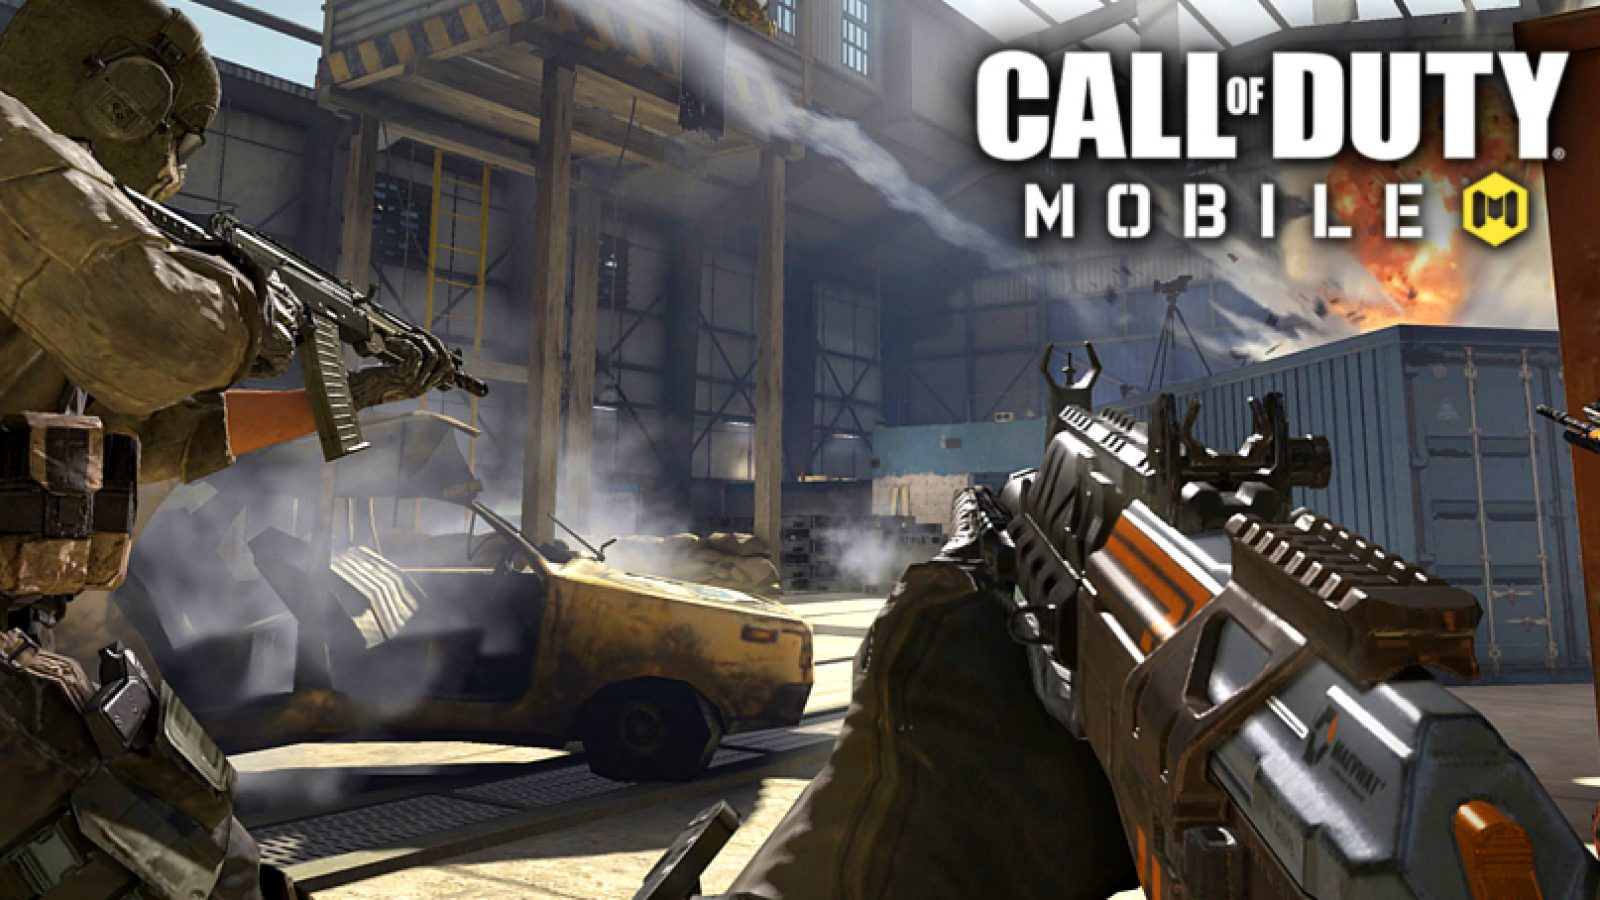 Call of duty плей маркет. Call of Duty мобайл. Call of Duty 4 mobile. Call of Duty mobile 2020. Call of Duty mobile Battle Royale.